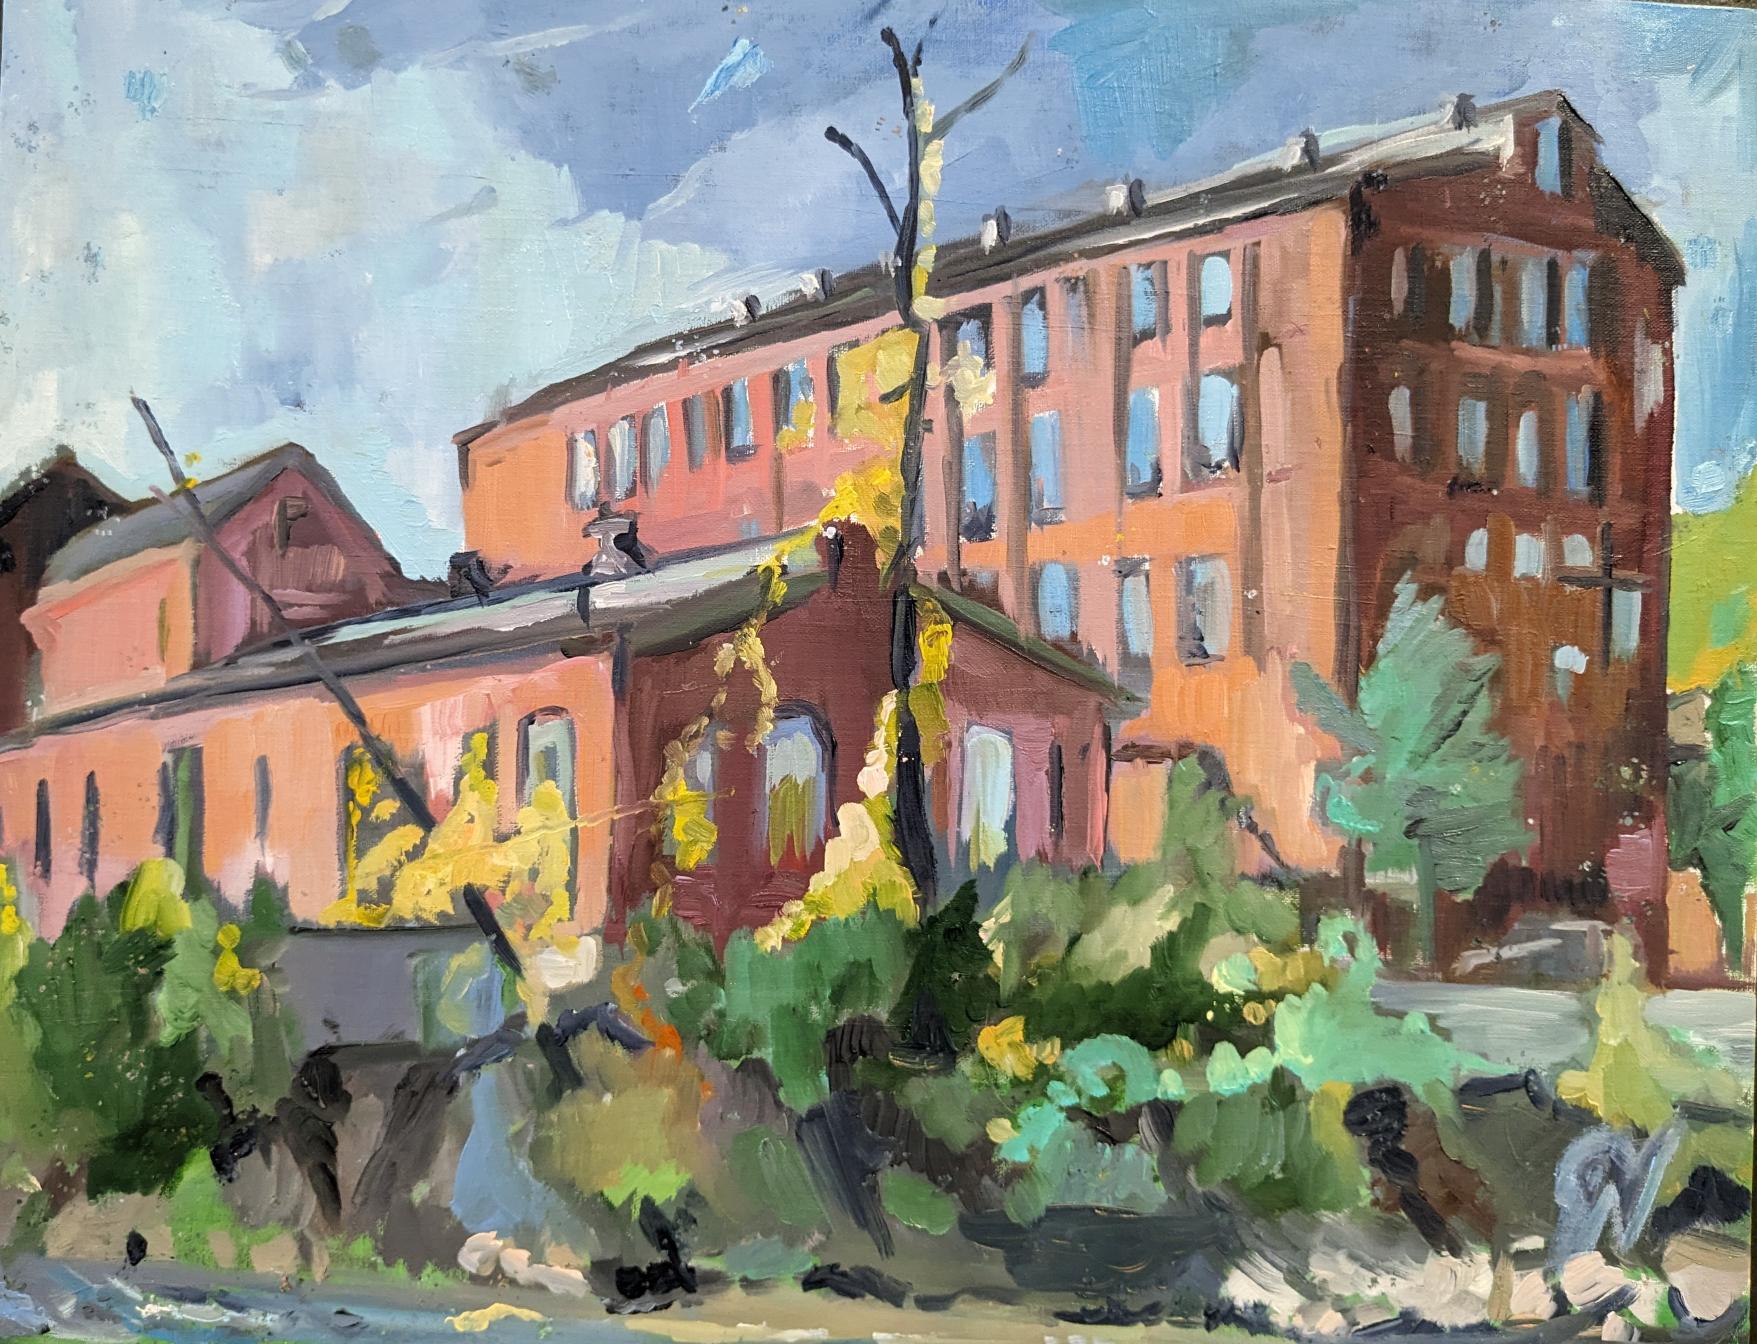 A plein air painting by Jeff Vaccarella of the Silk complex  by  the Karl Stirner Arts Trail in Easton, Pennsylvania